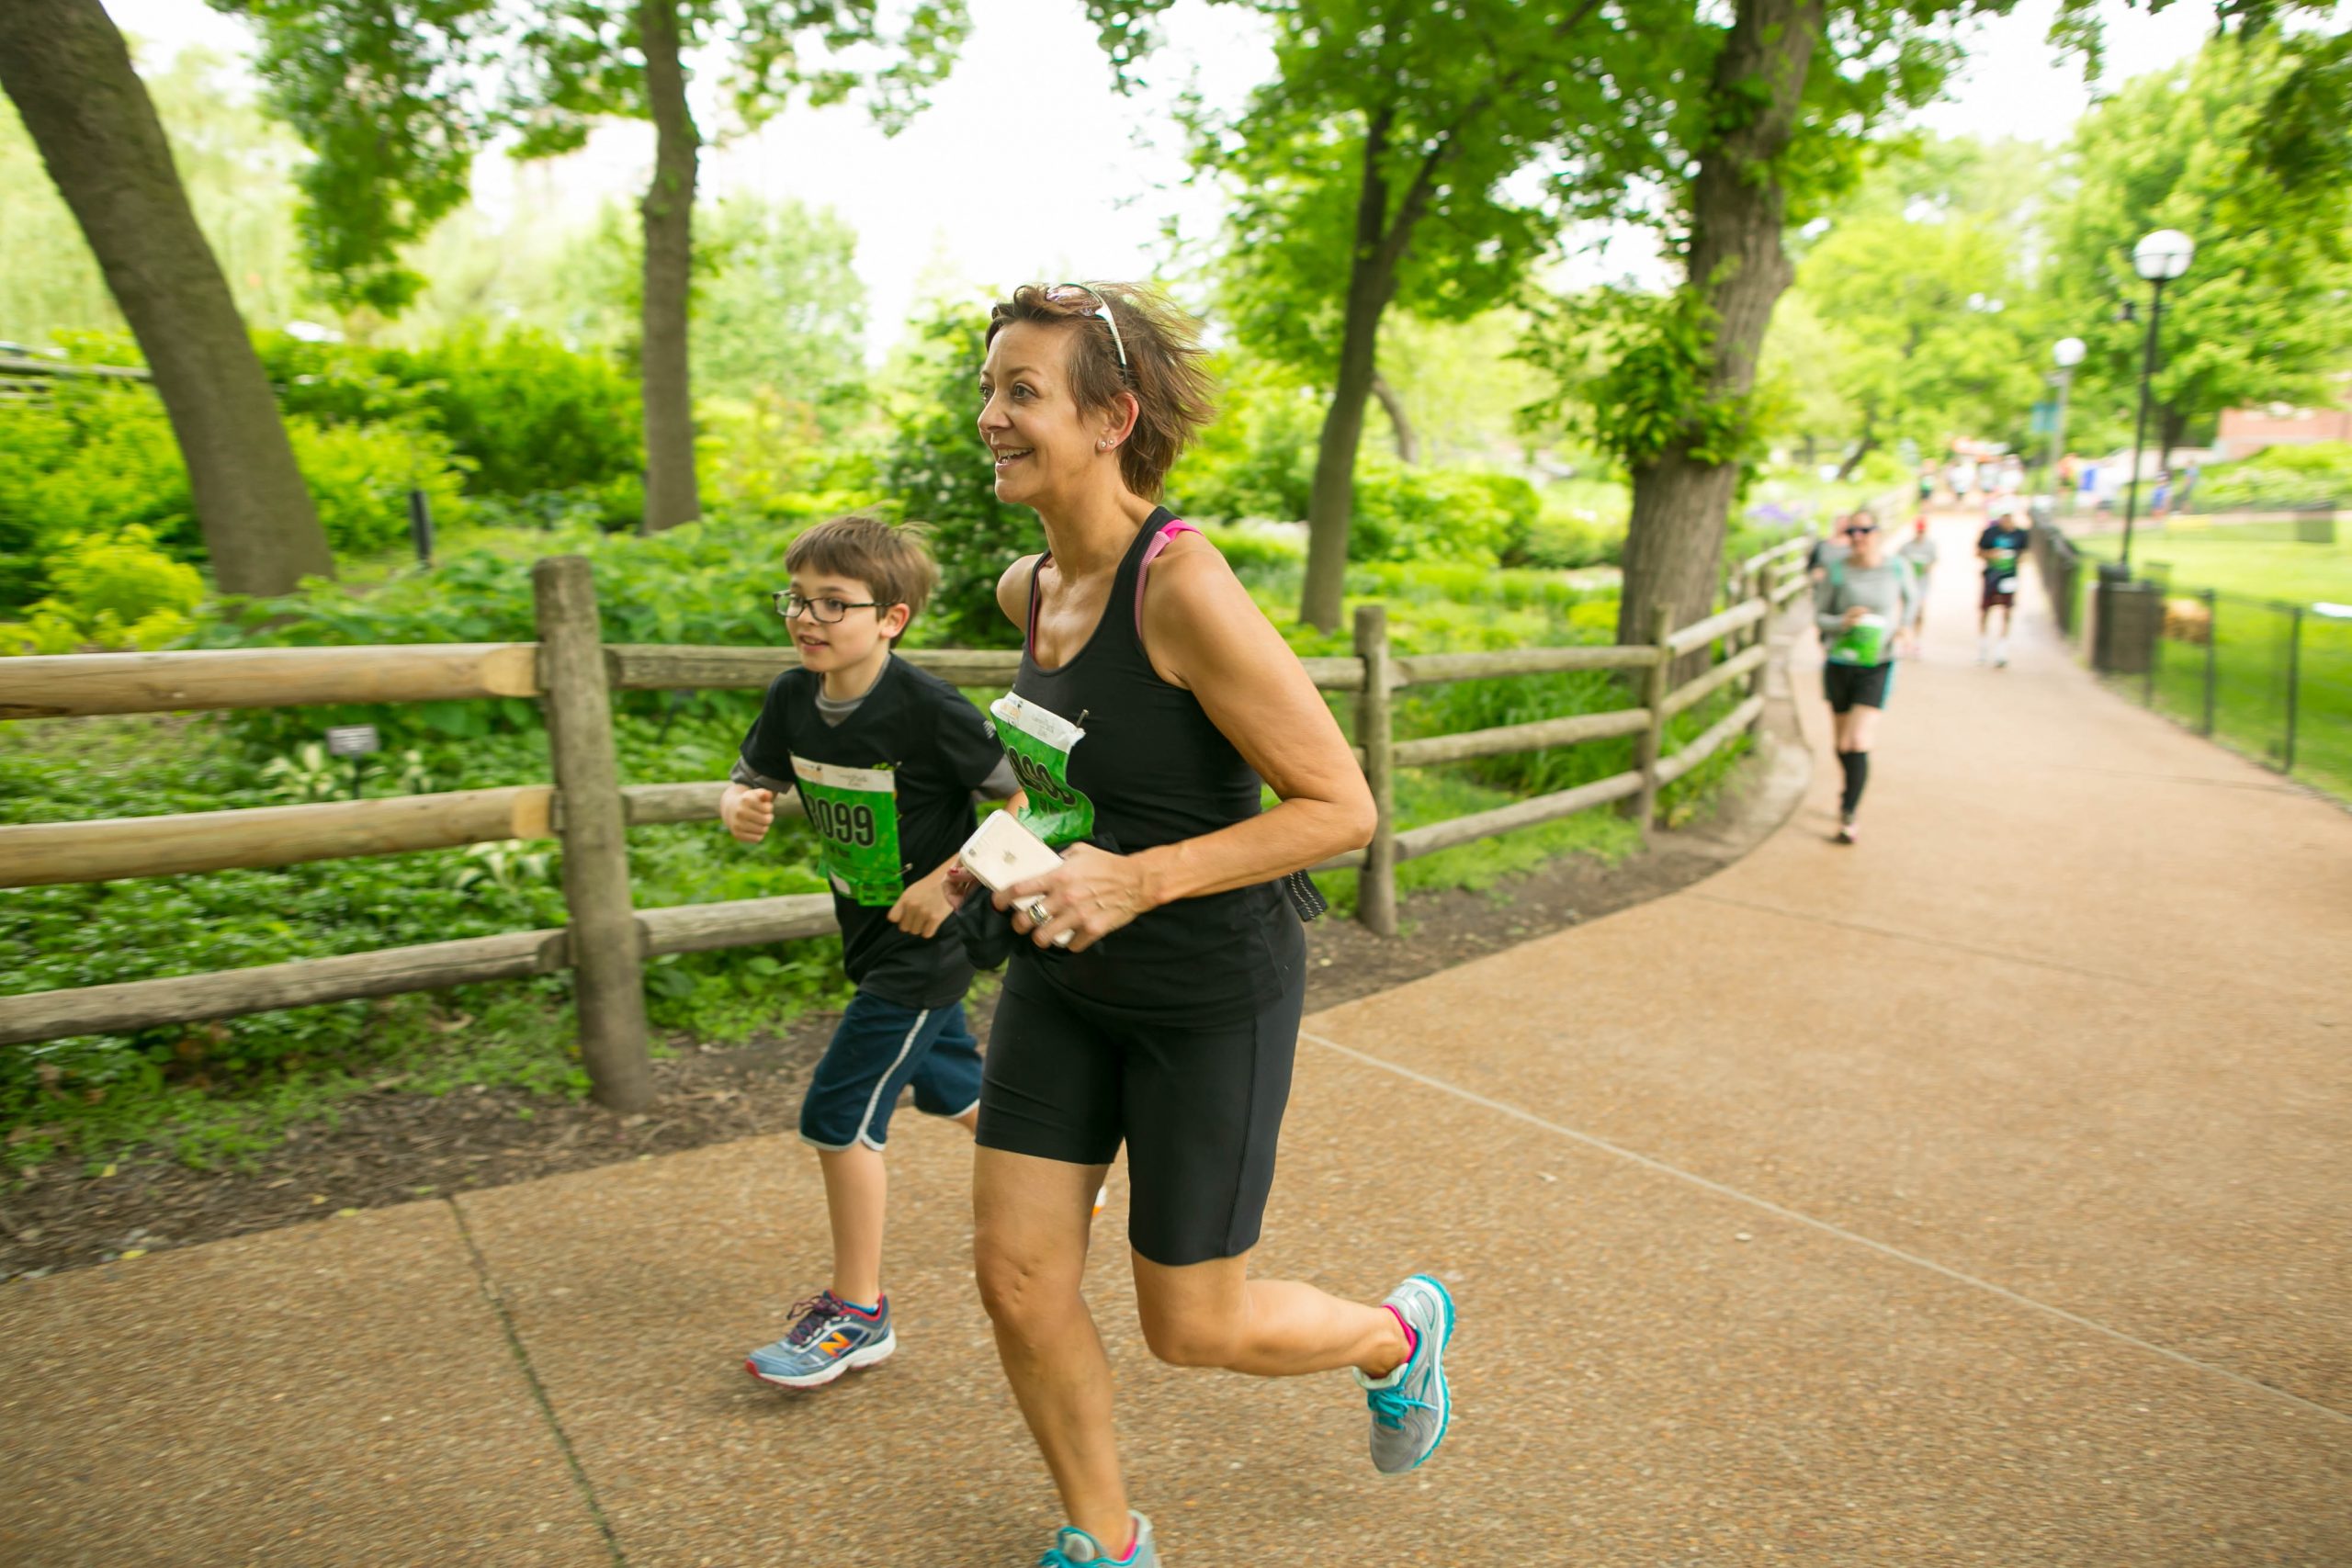 A Chicago Favorite, Lincoln Park Zoo’s 43rd Annual Run for the Zoo 5K